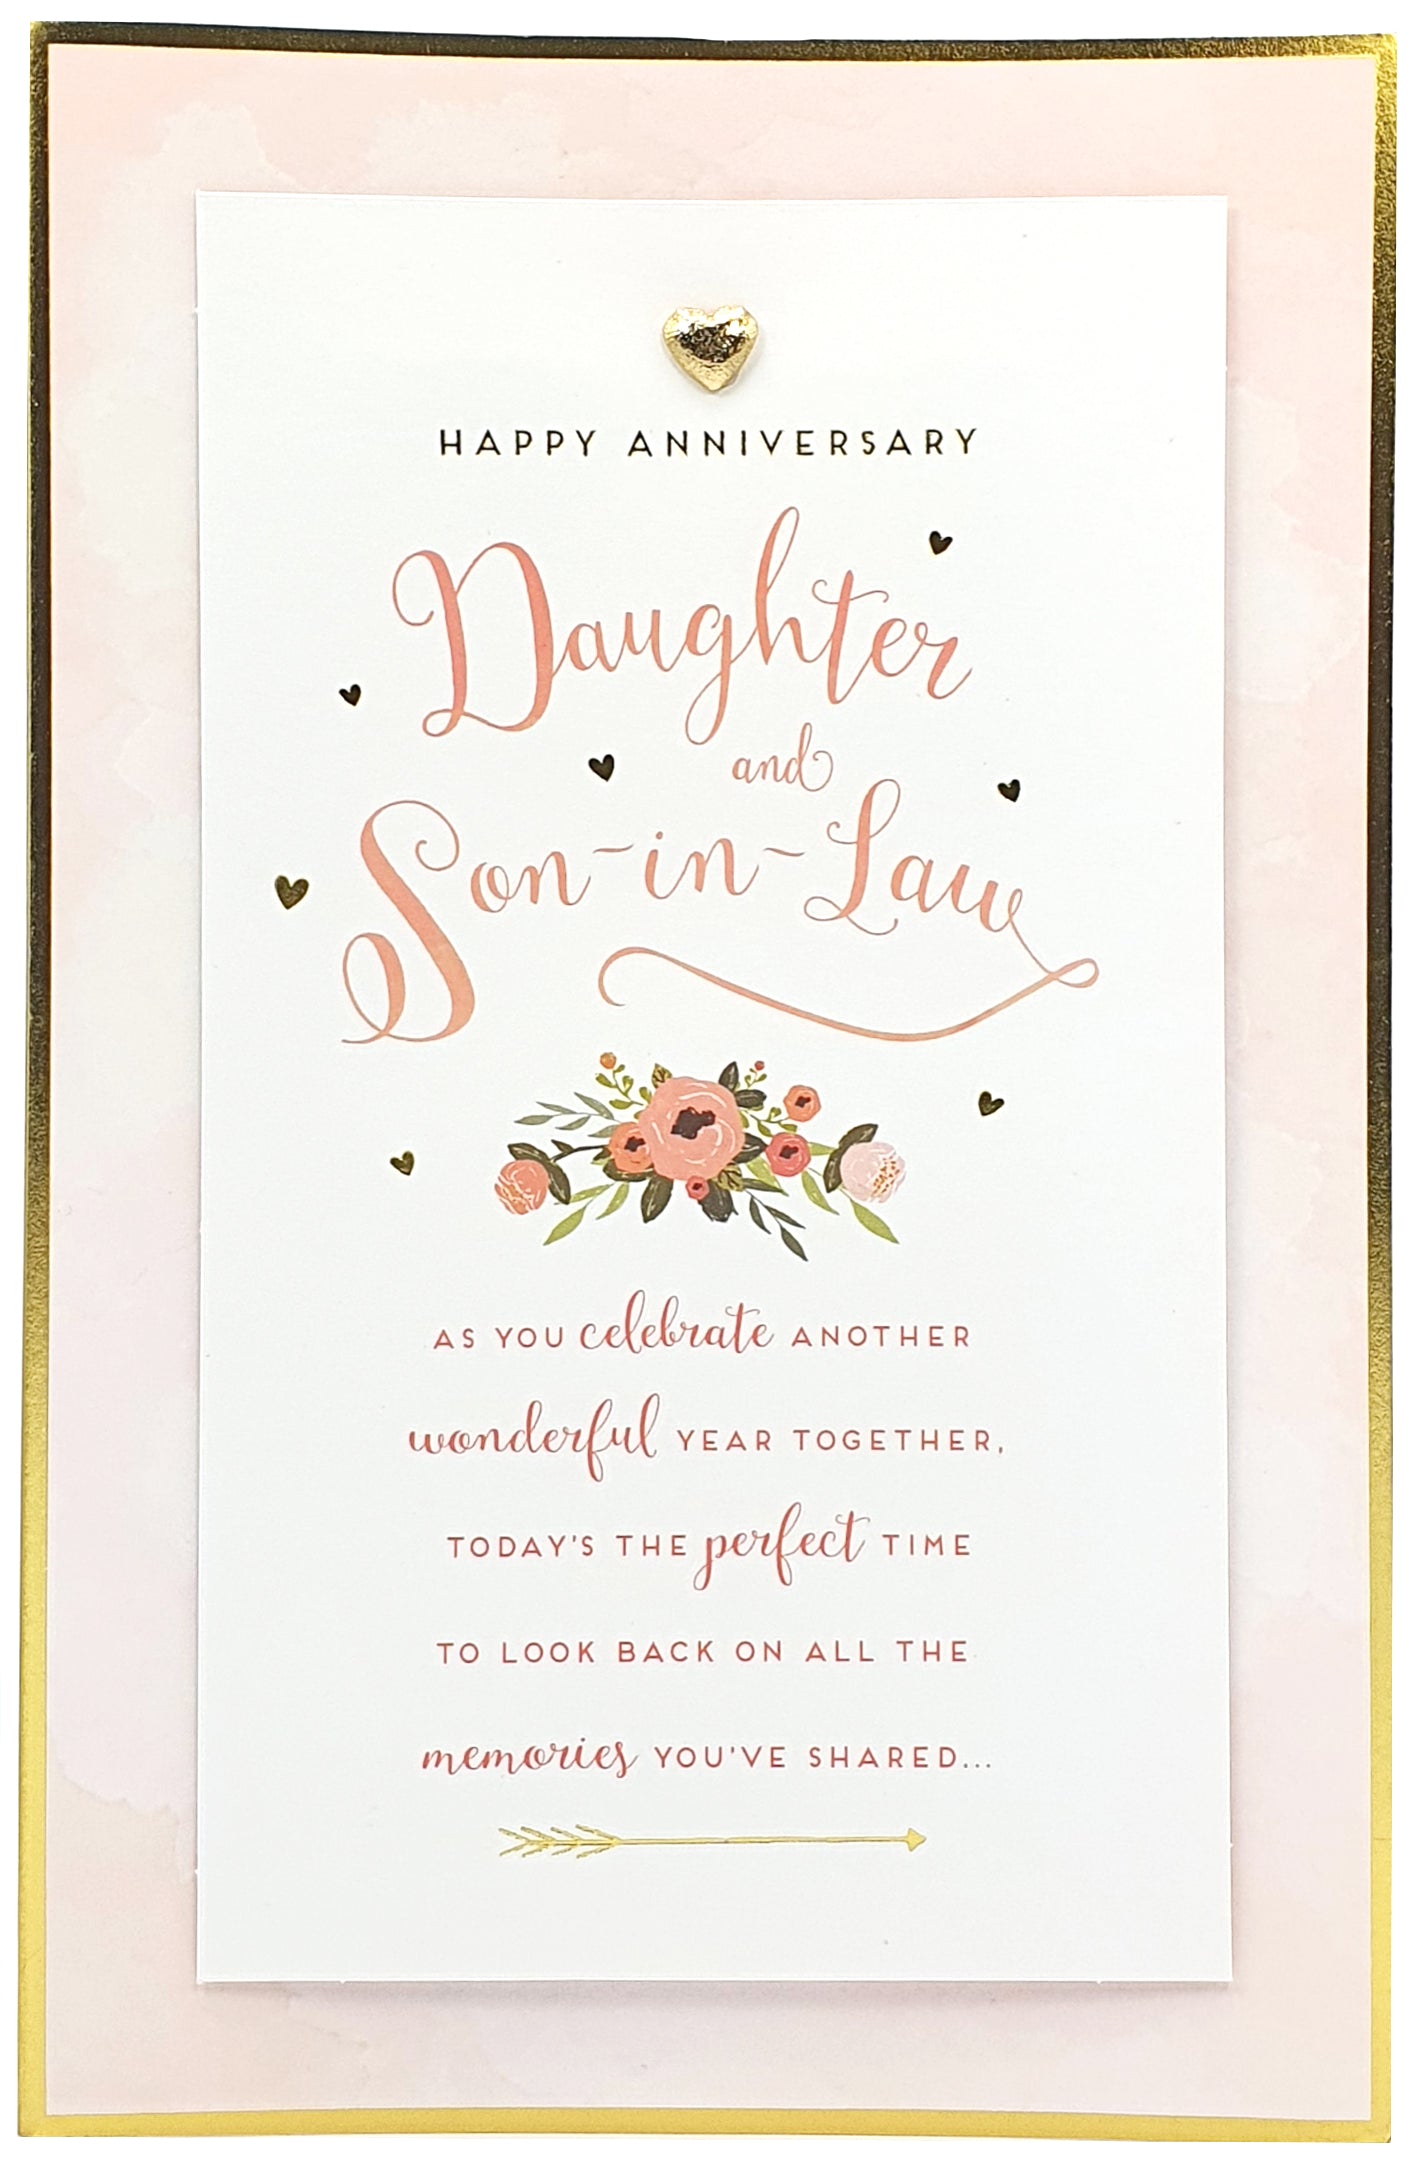 Happy Wedding Anniversary Daughter and Son-in-Law Card